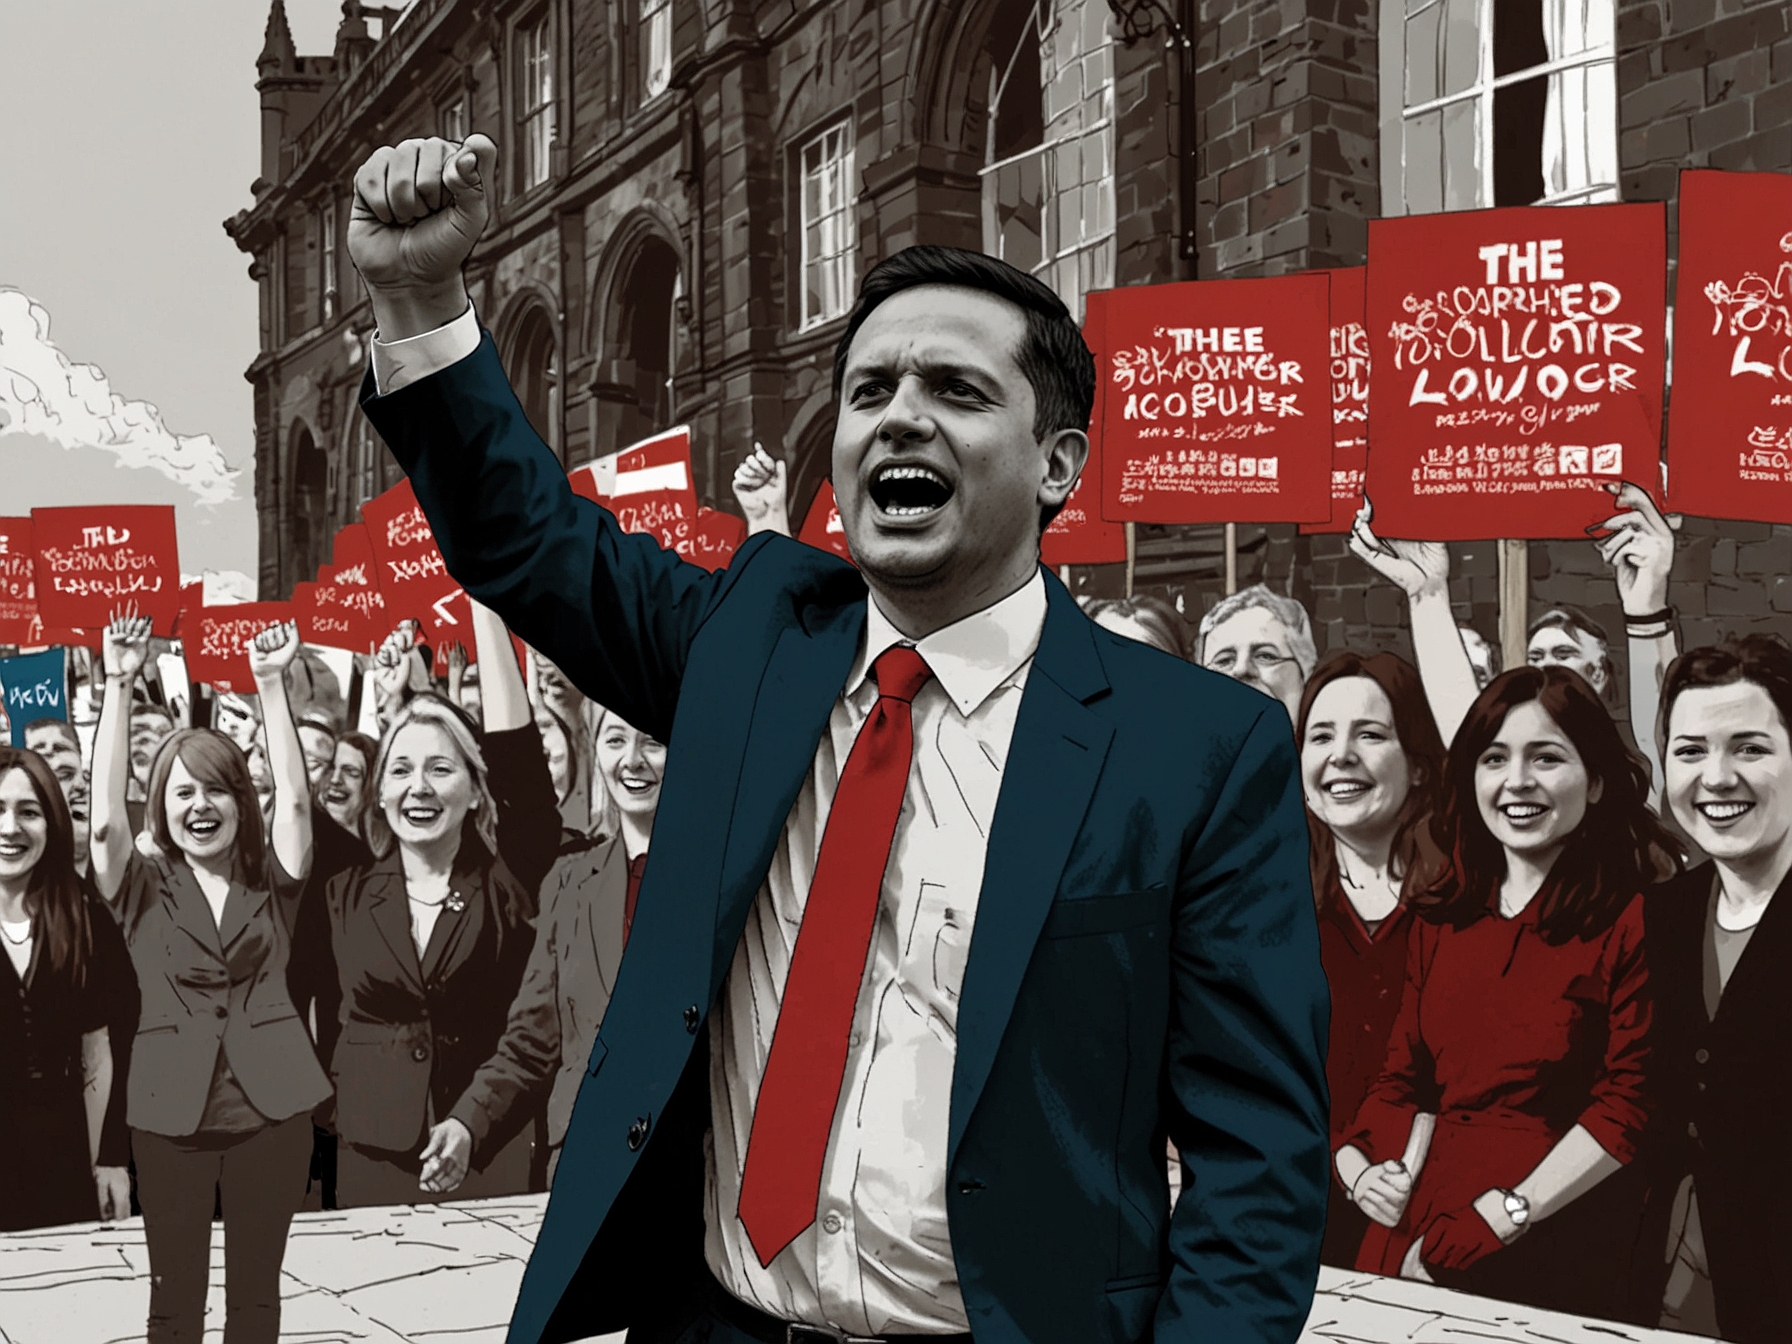 Scottish Labour supporters rallying behind Anas Sarwar as he outlines the party's vision and key policy areas to win the 2026 Holyrood election, fostering optimism and unity.